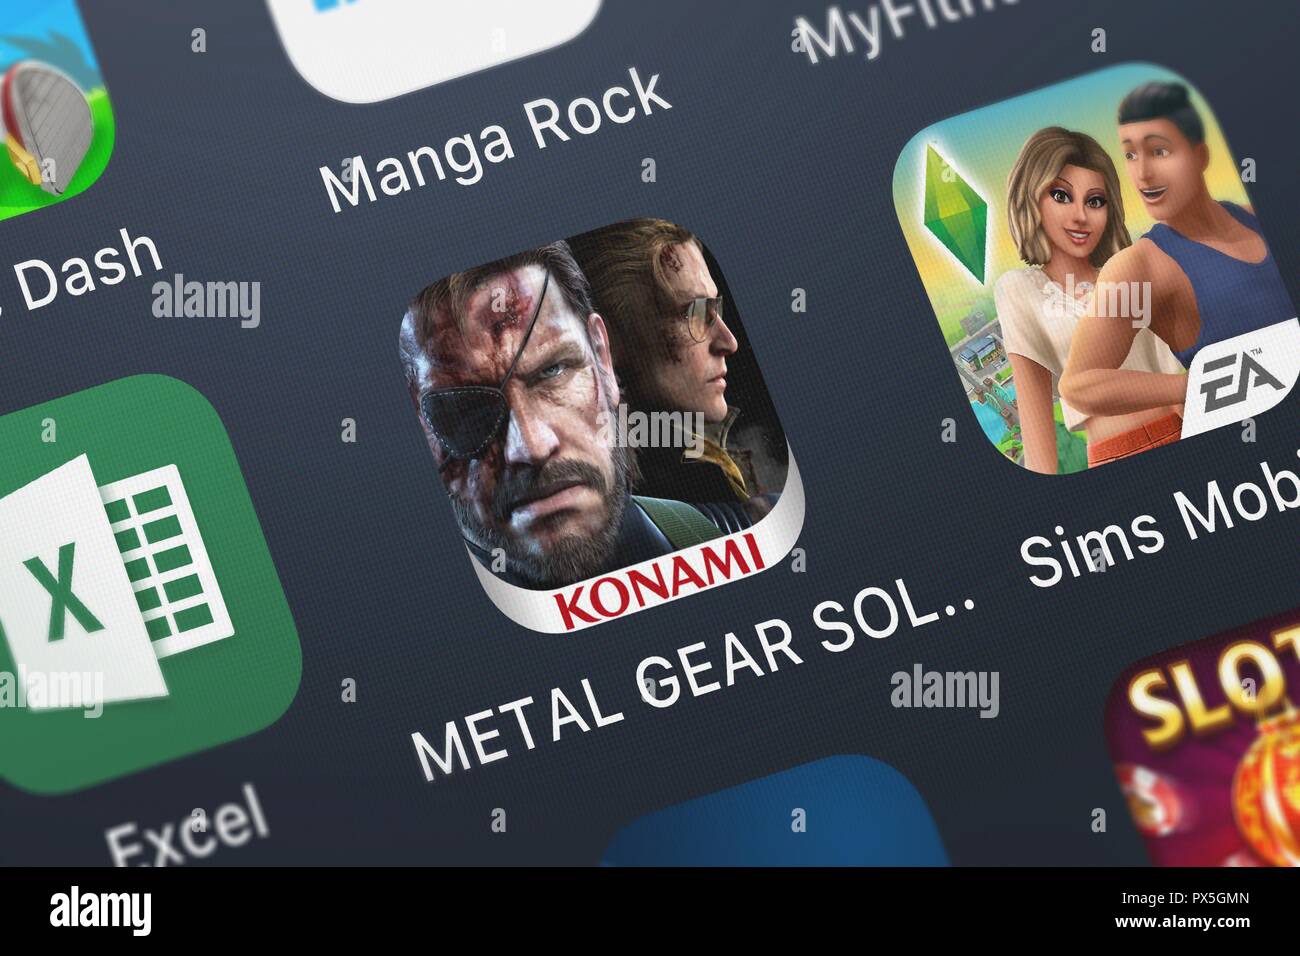 London, United Kingdom - October 19, 2018: Close-up shot of the METAL GEAR SOLID V: GROUND ZEROES application icon from KONAMI on an iPhone. Stock Photo